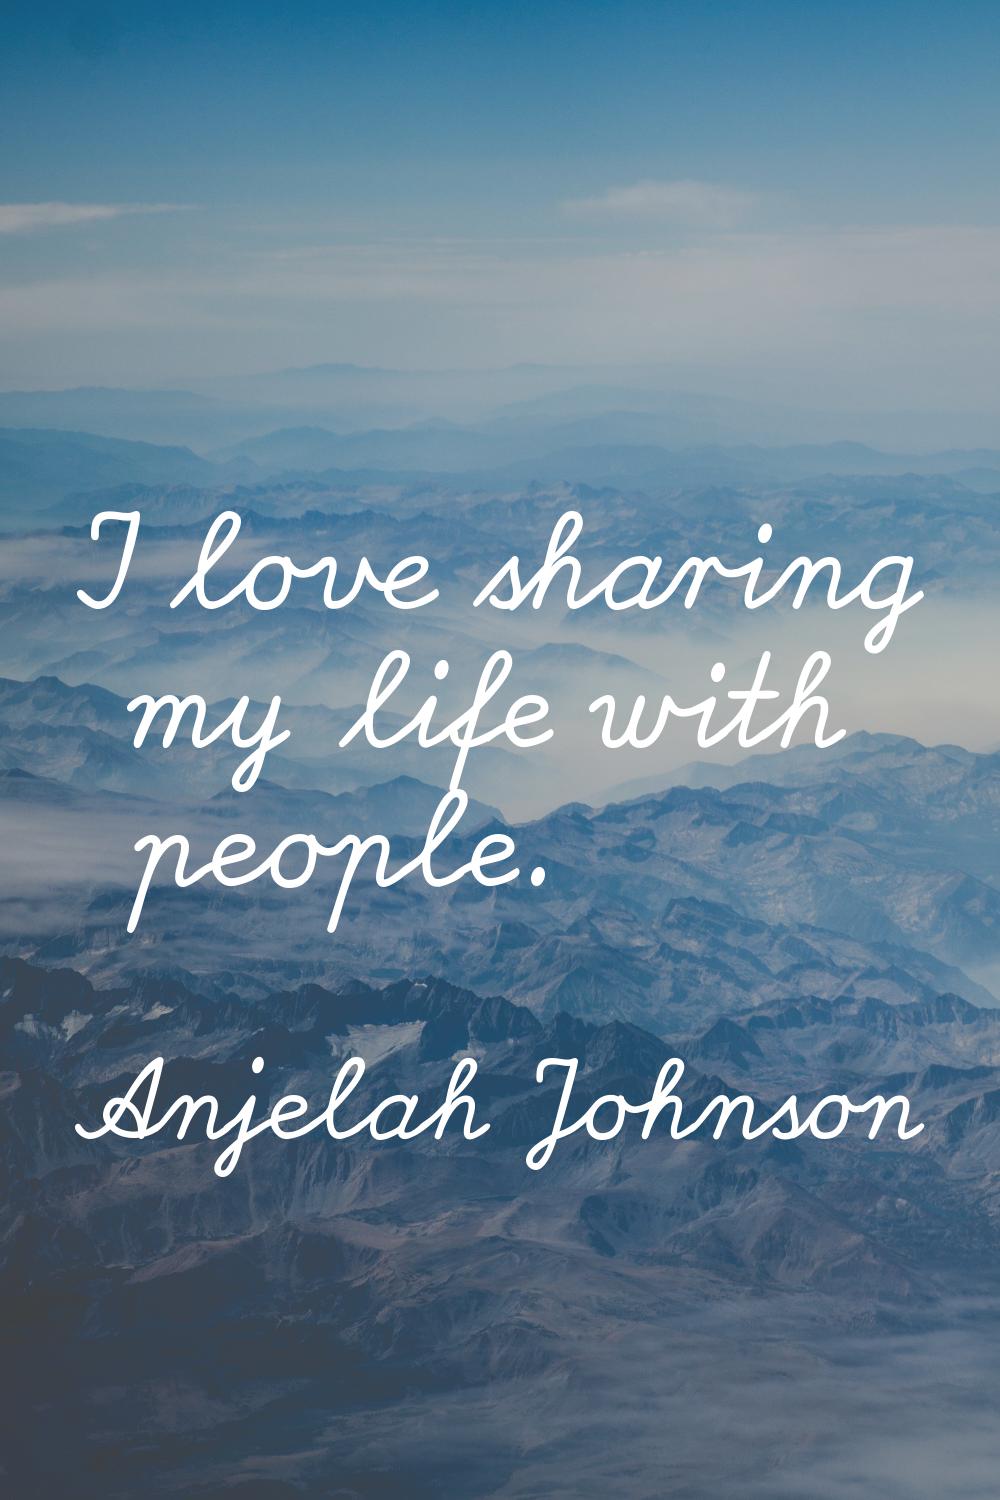 I love sharing my life with people.